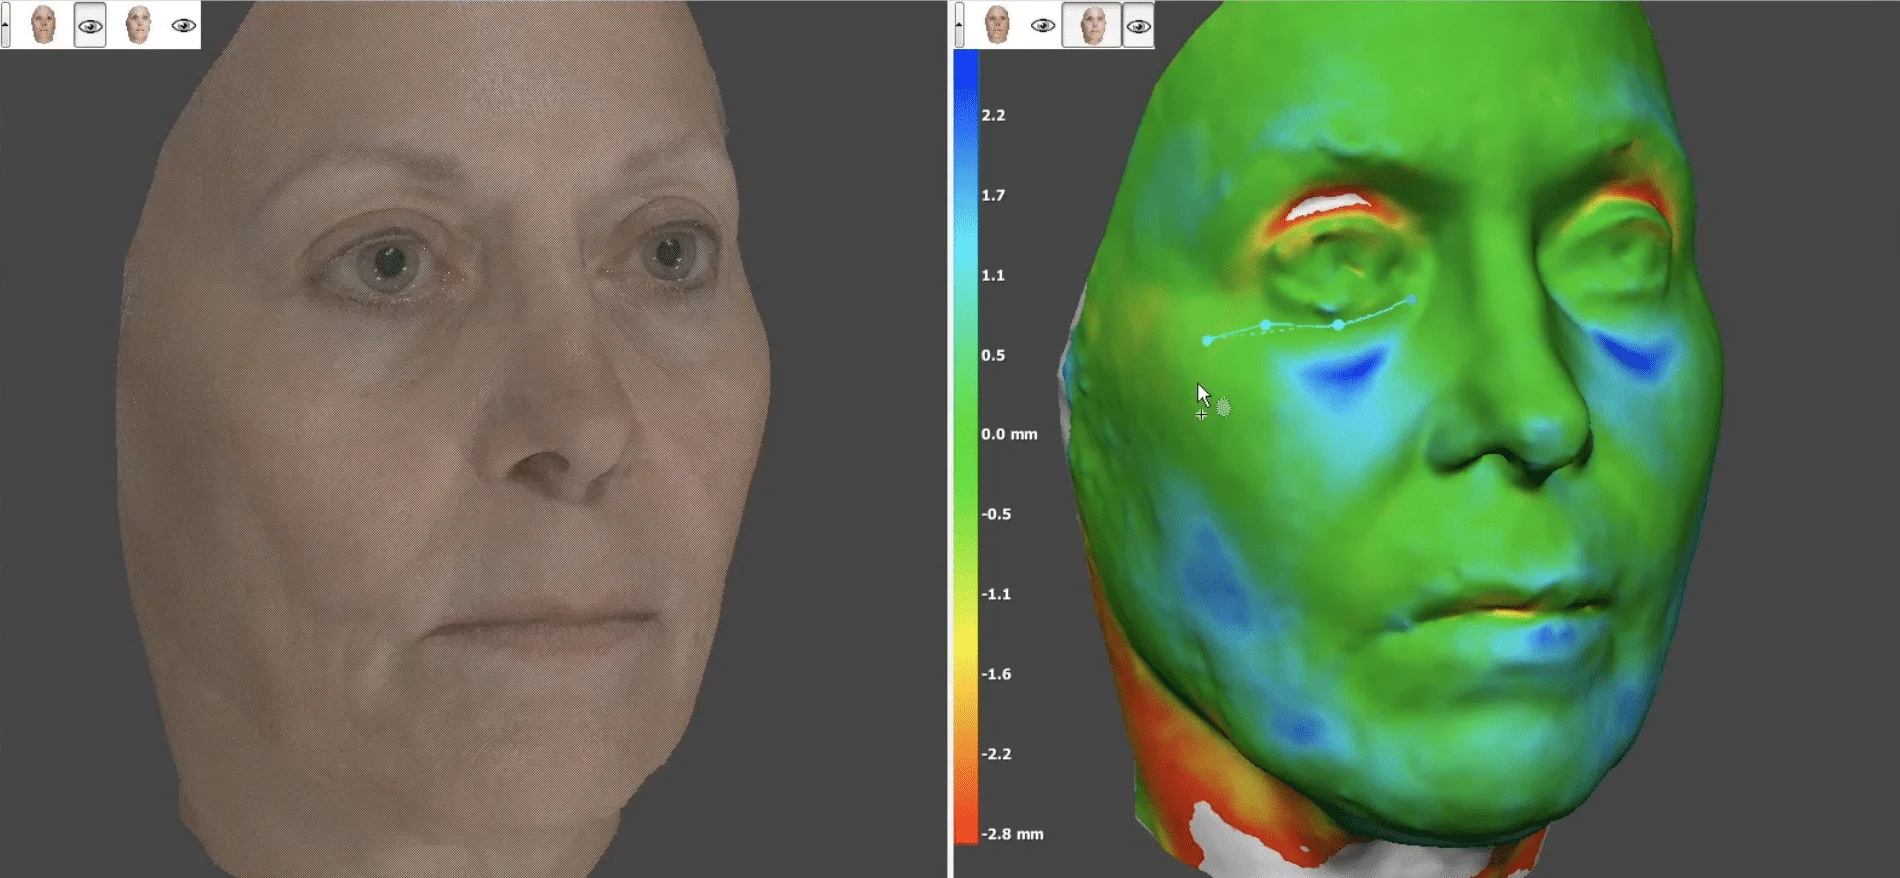 3D Facial Scanning Before Cosmetic Surgery